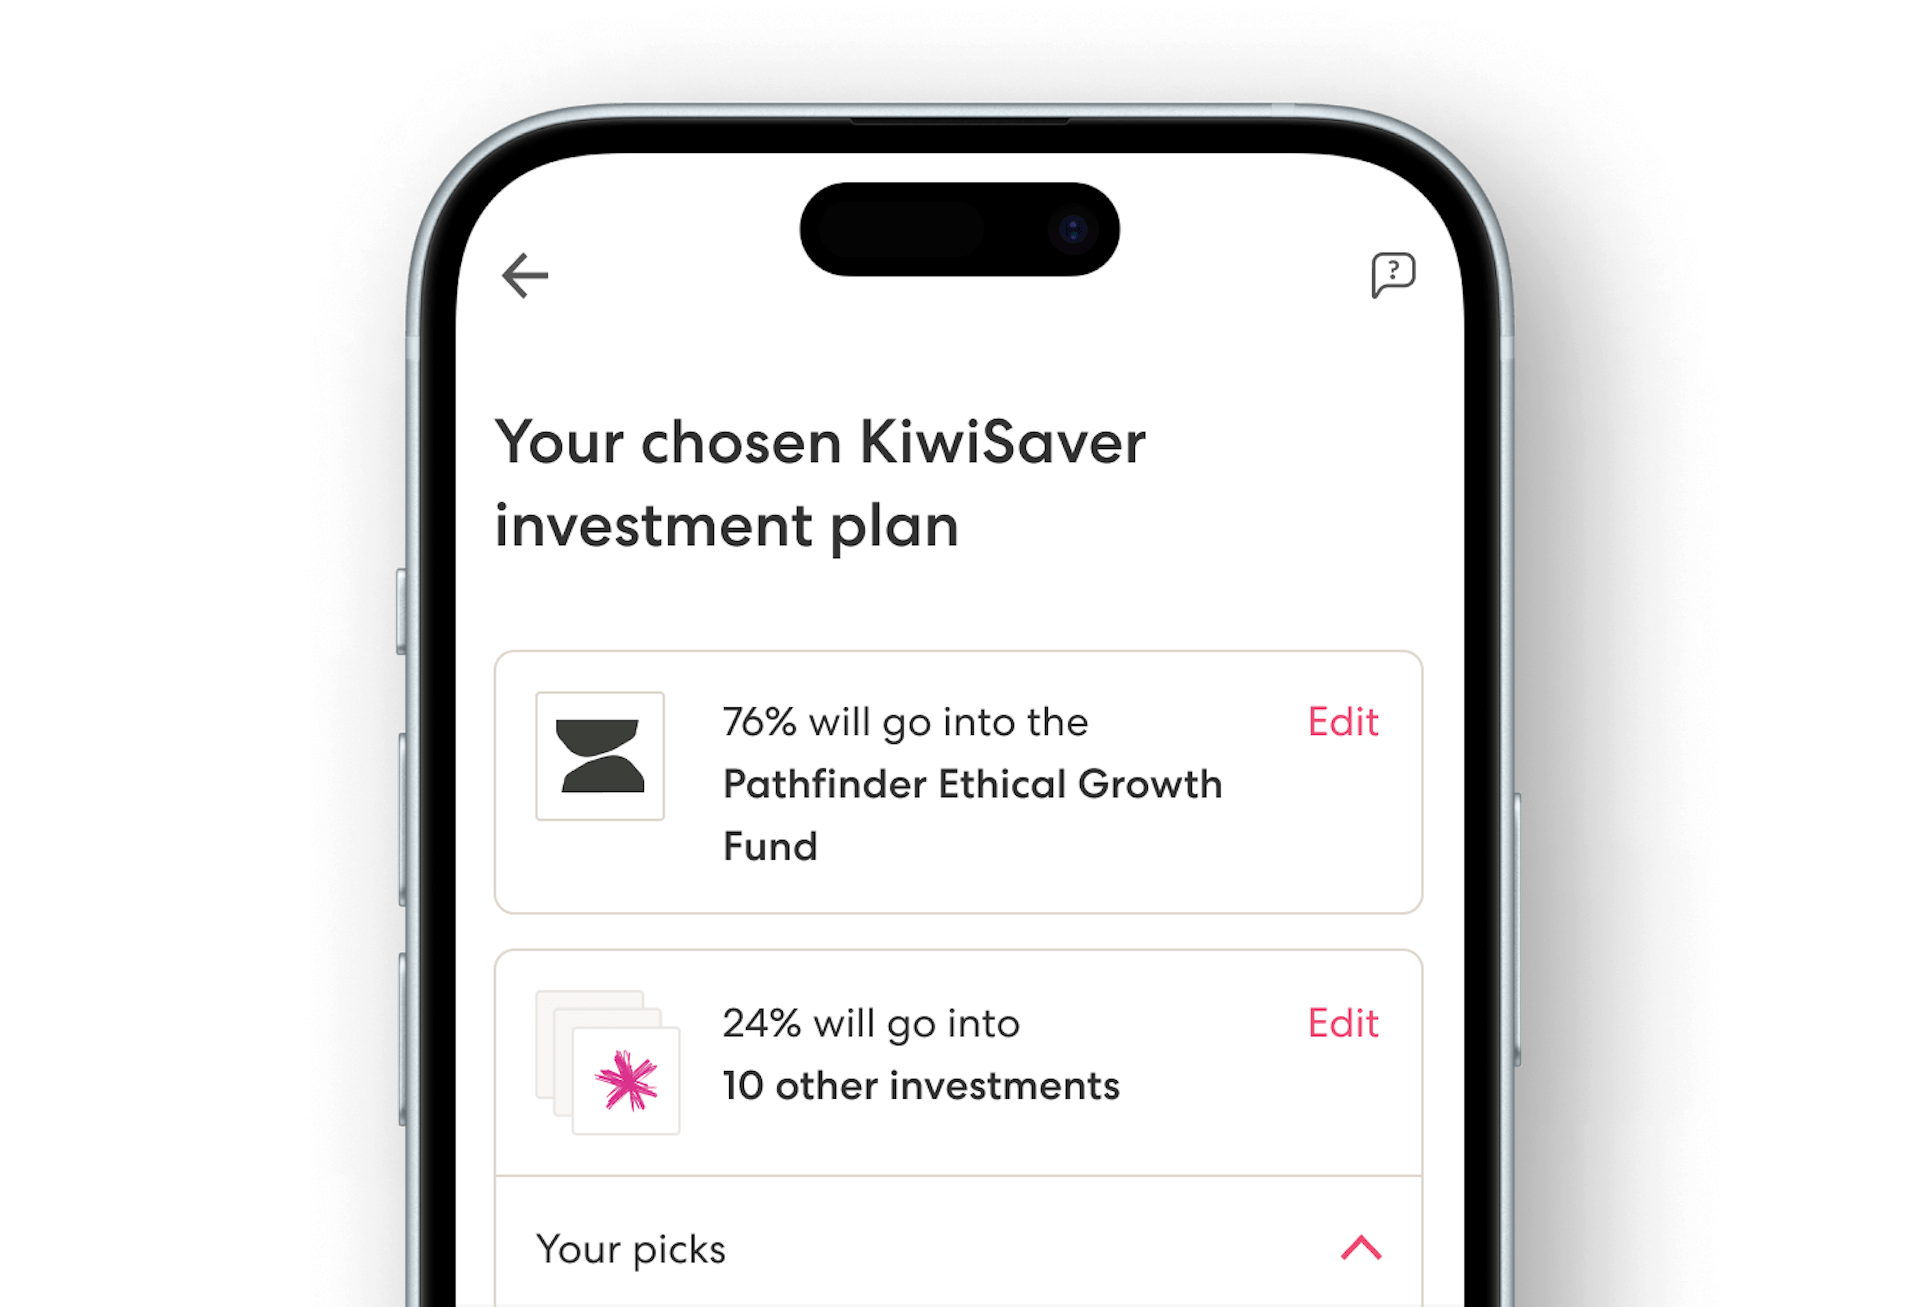 The top half of an iPhone screen showing a screen in the Sharesies app. Displayed is an investment plan made up of the Pathfinder Ethical Growth Fund and 10 other investments.